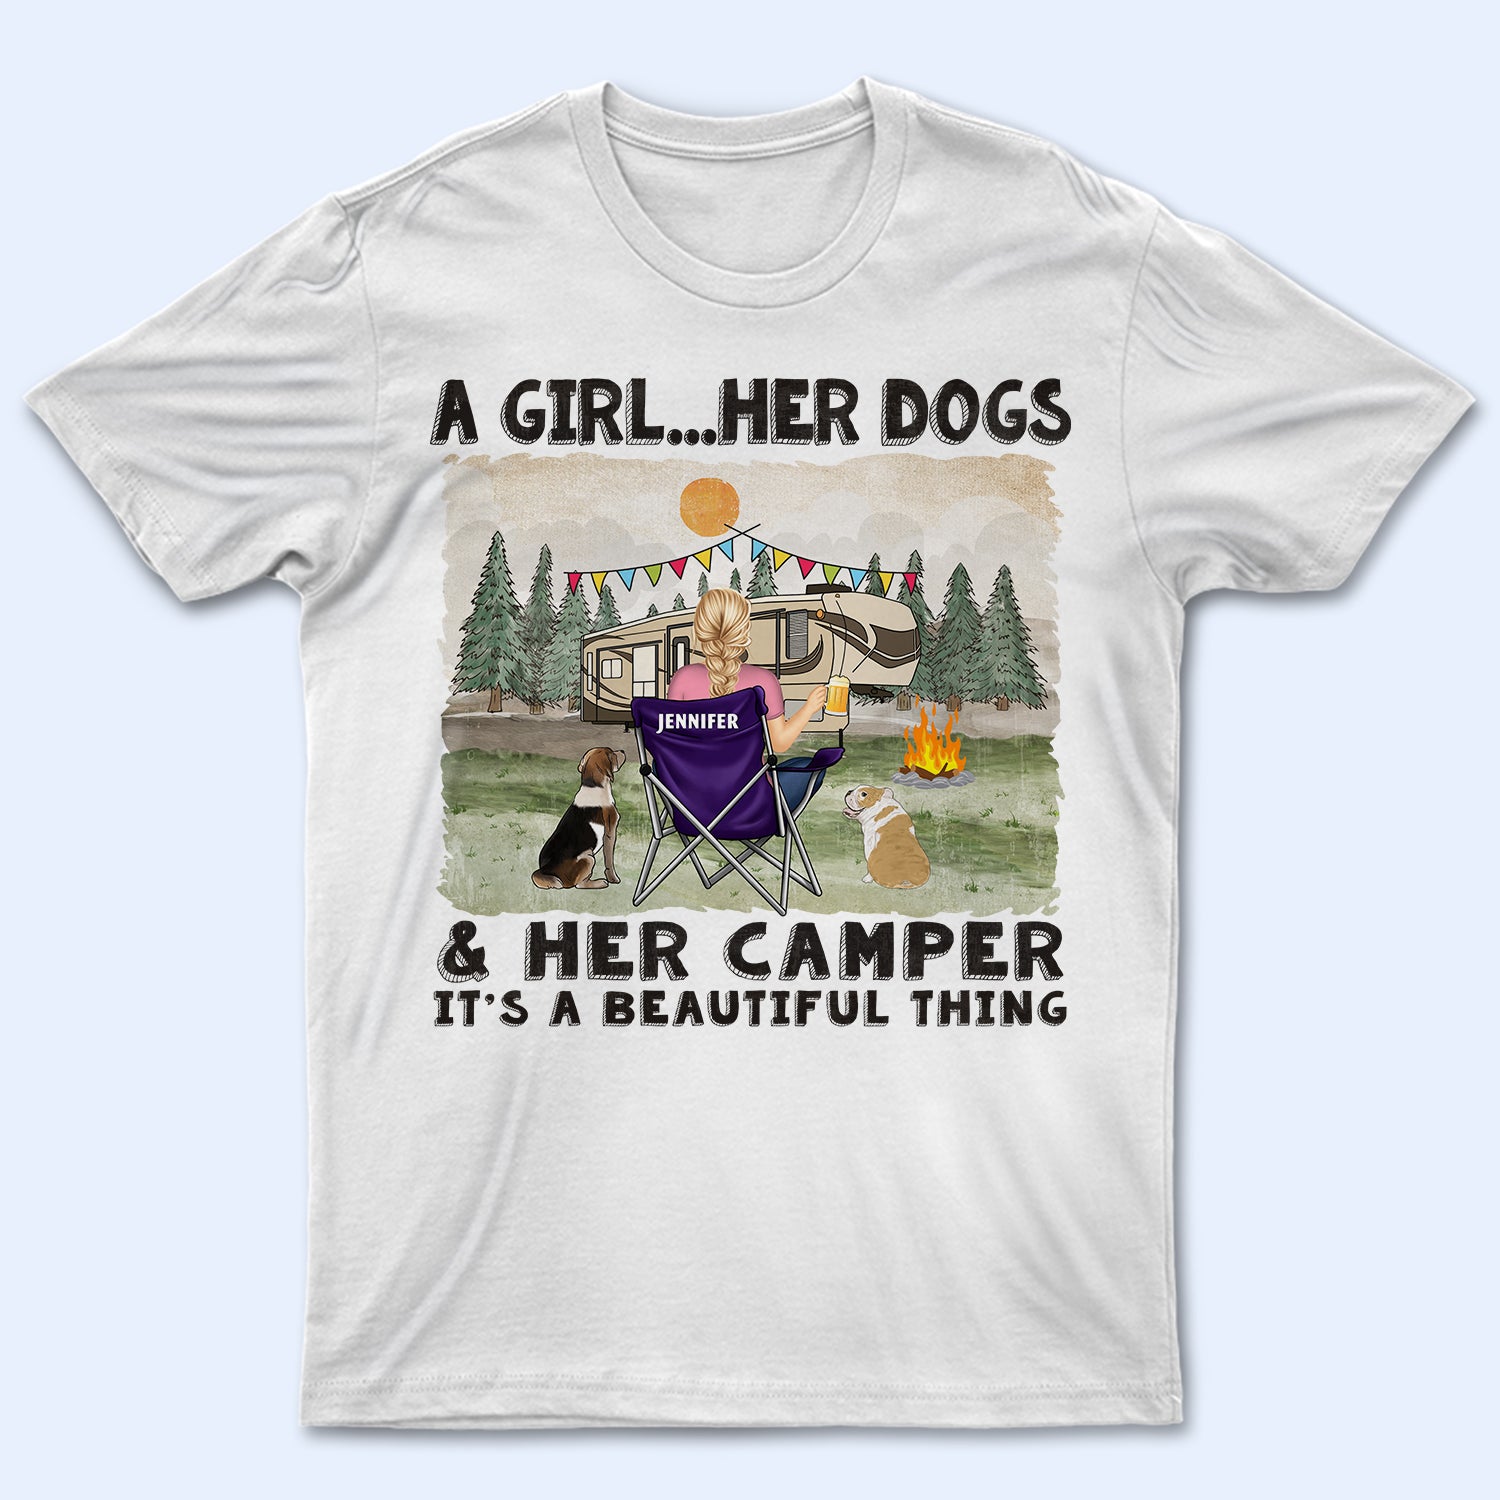 A Girl And Her Dogs Beautiful Thing - Gift For Camping Lovers - Personalized T Shirt